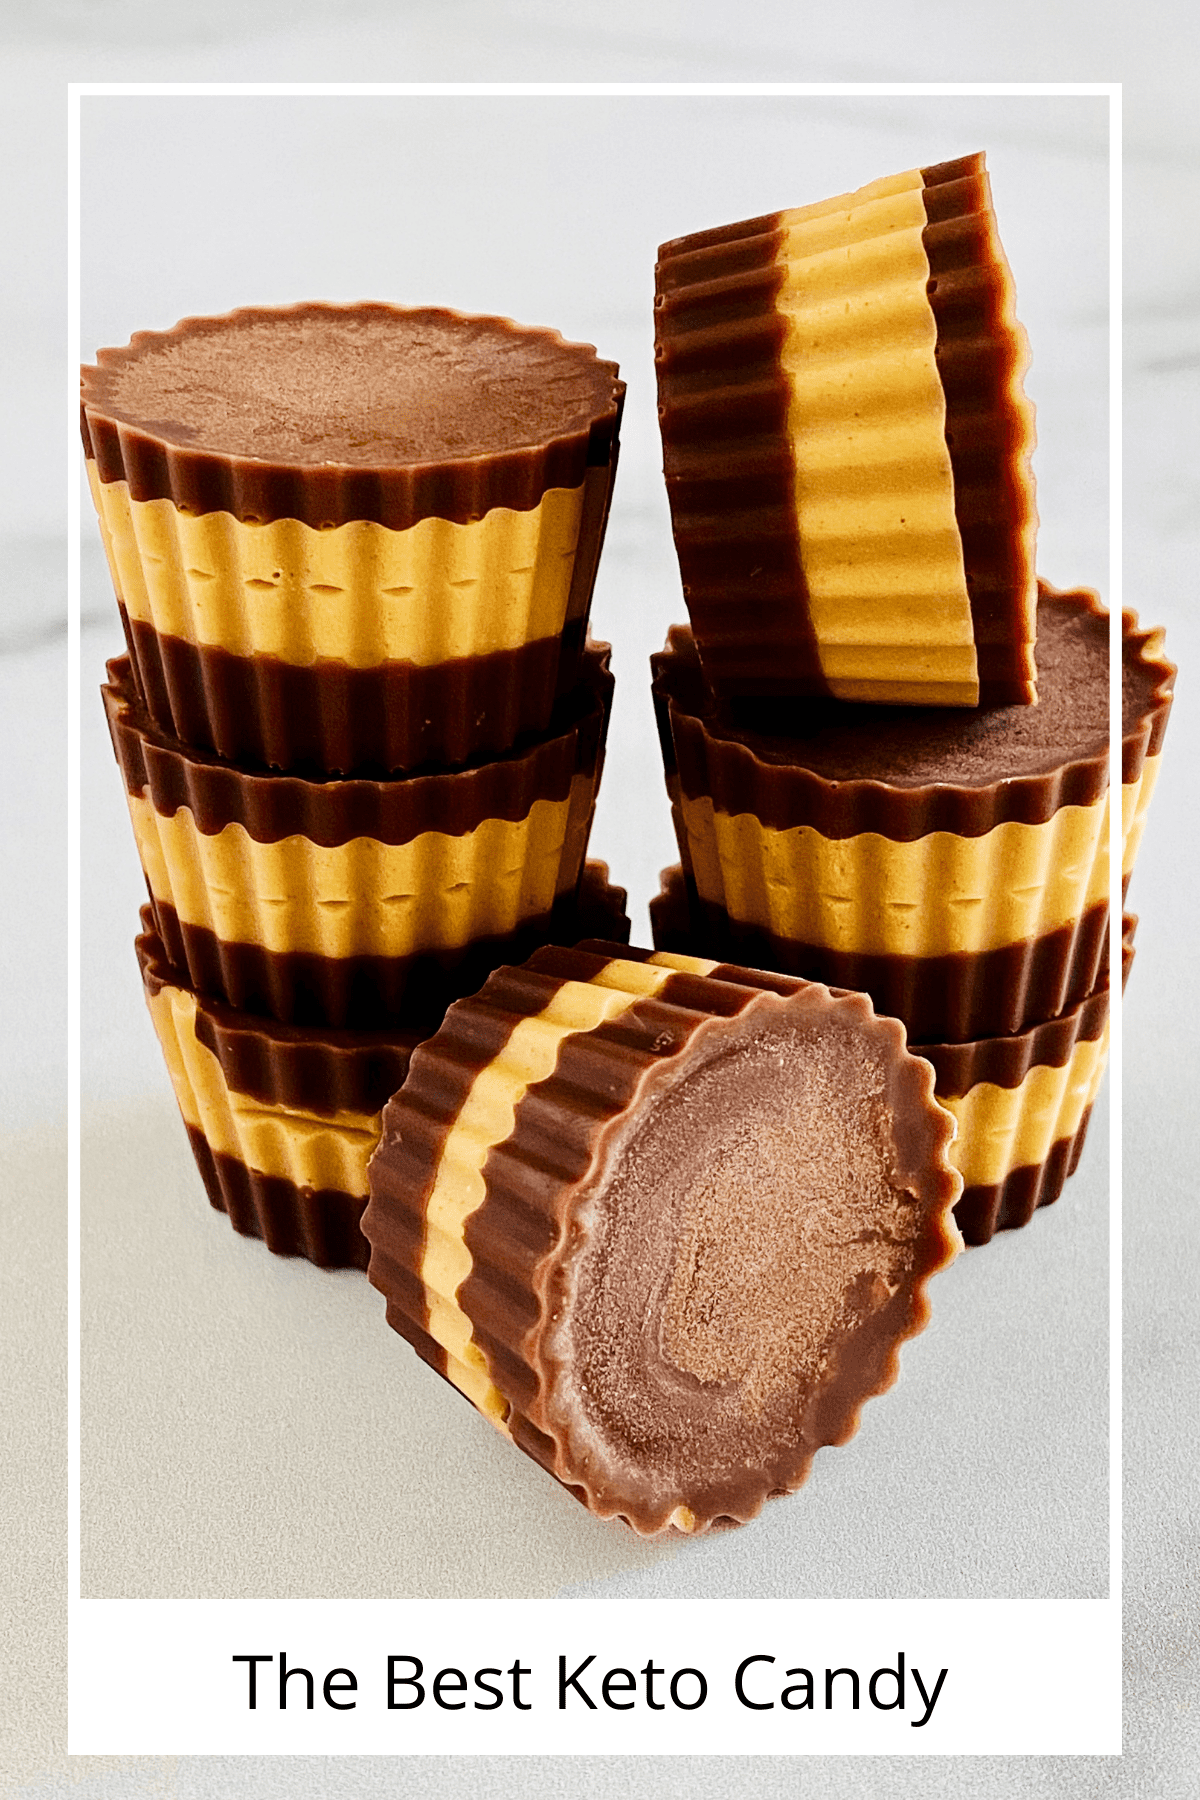 Chocolate peanut butter cups that are stacked and sugar-free.